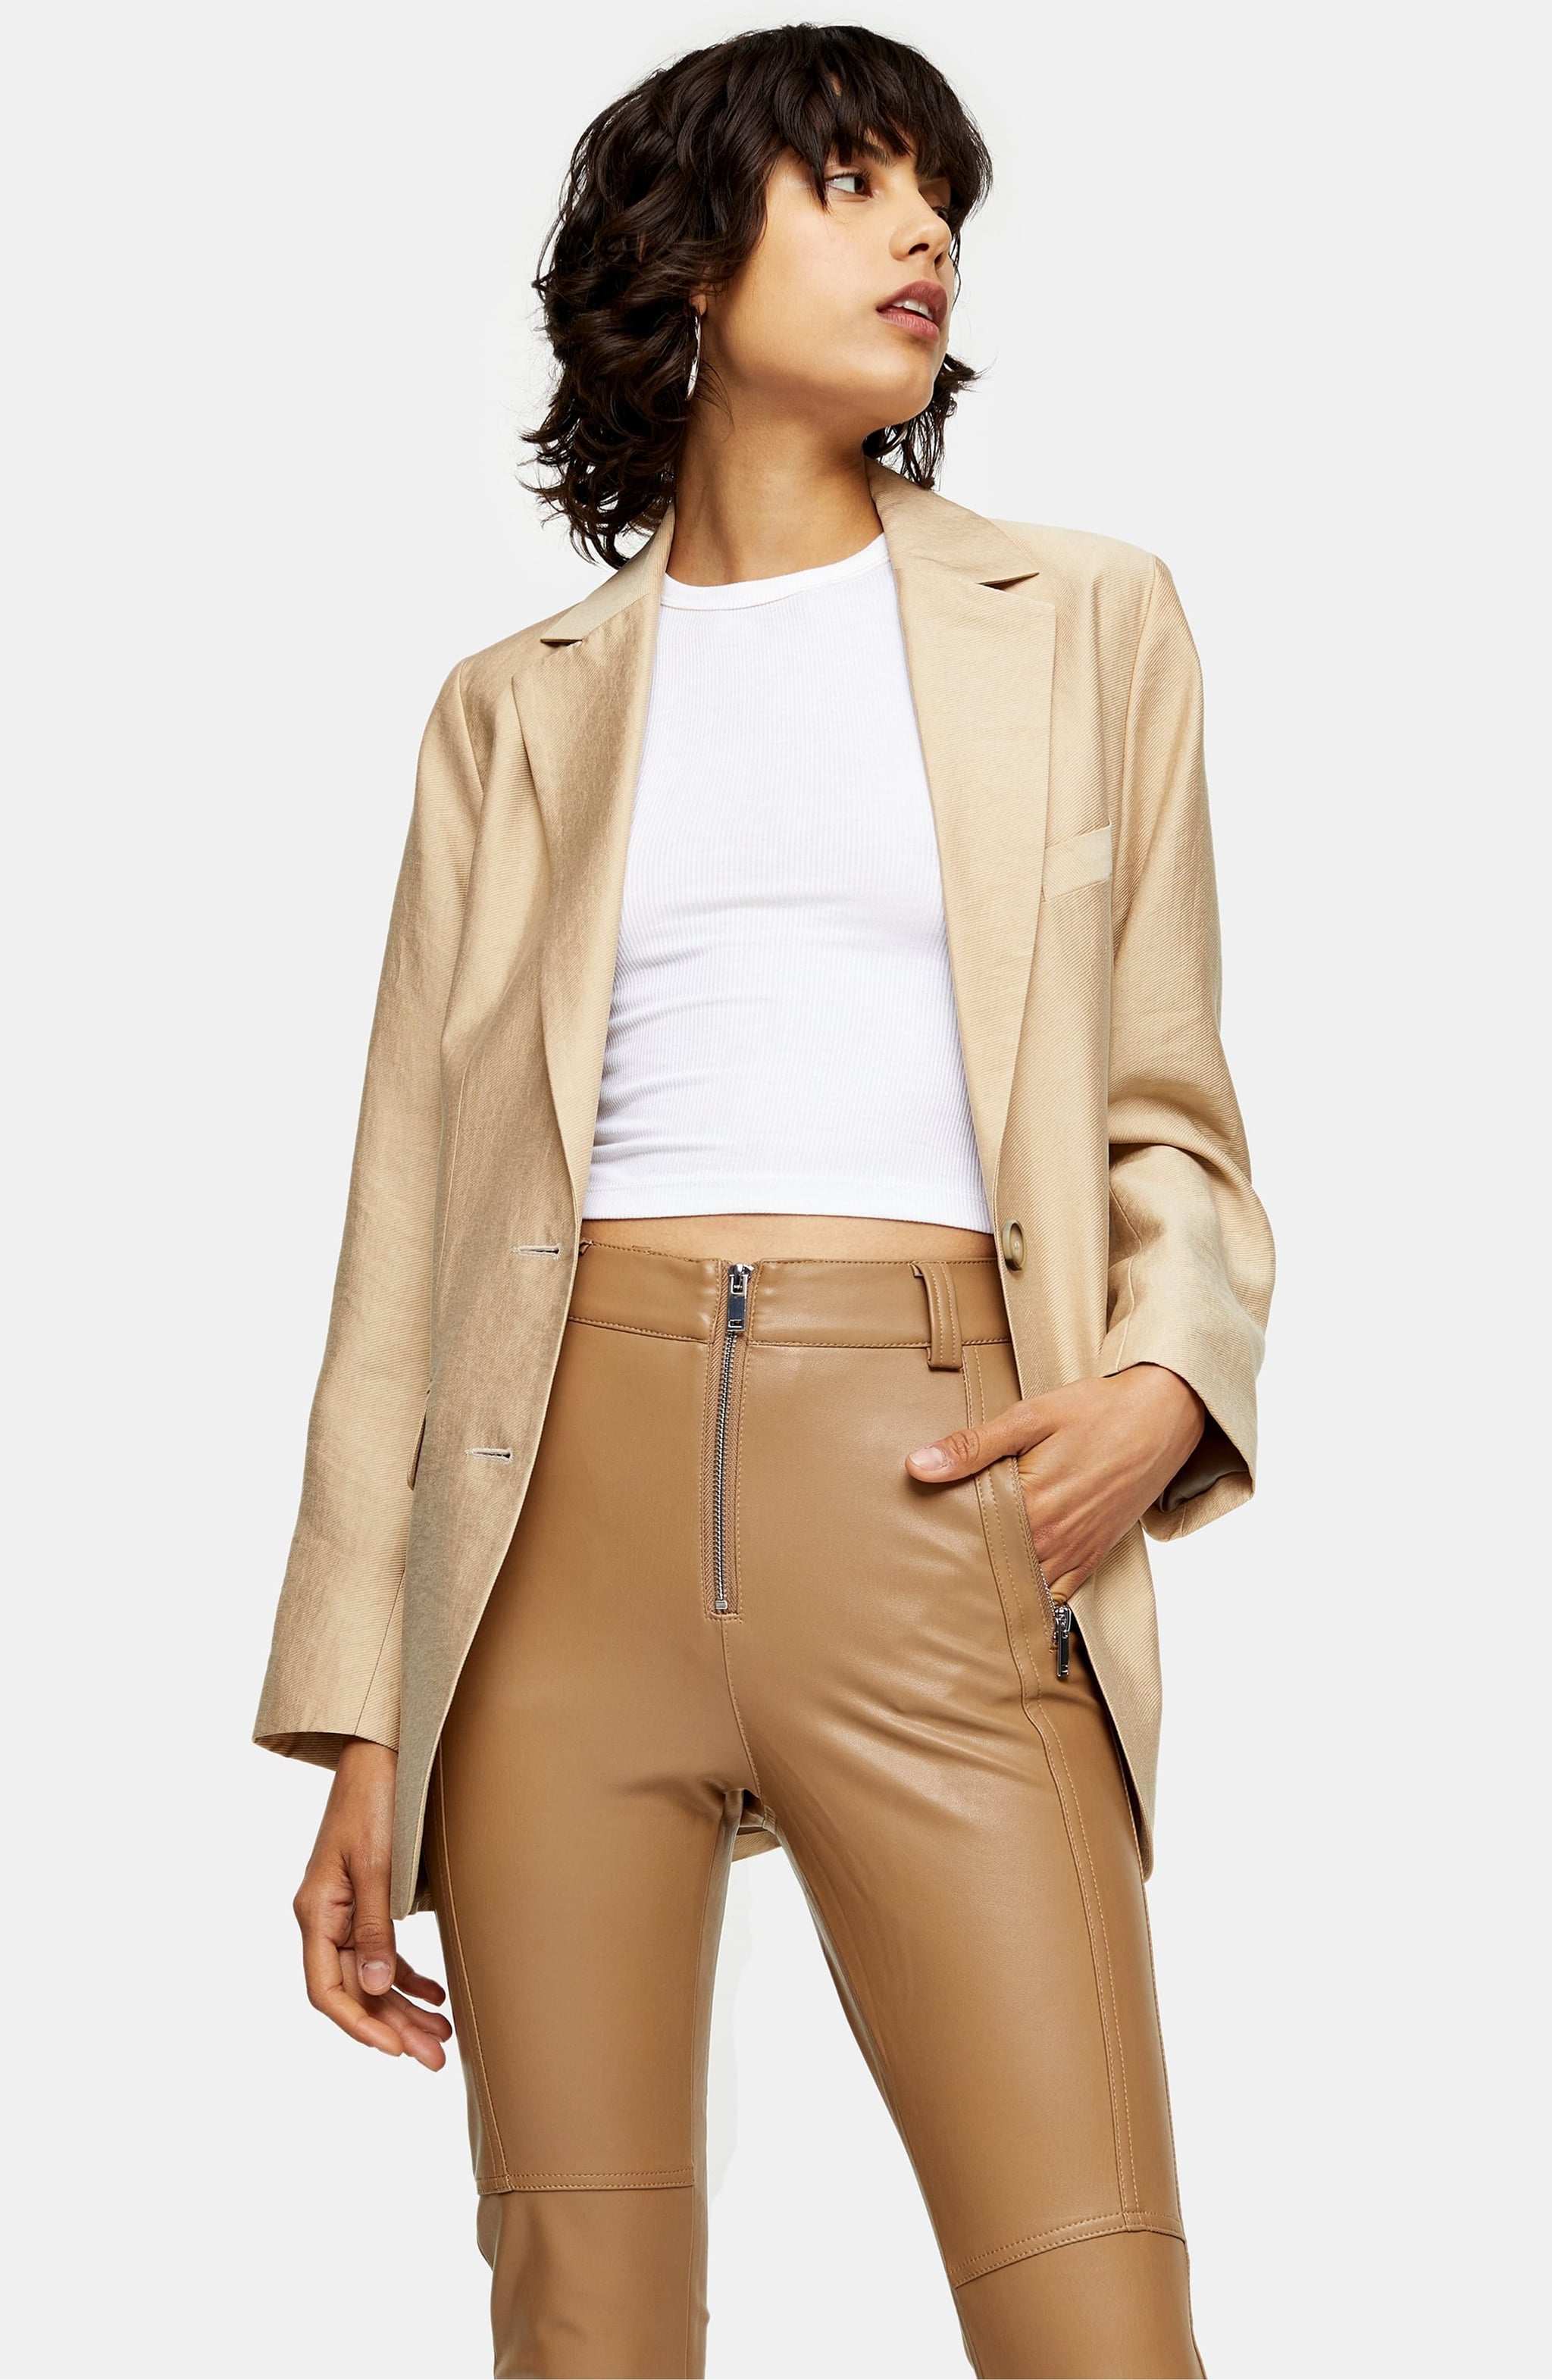 TopShop Side-Zip Leather Pants for Women